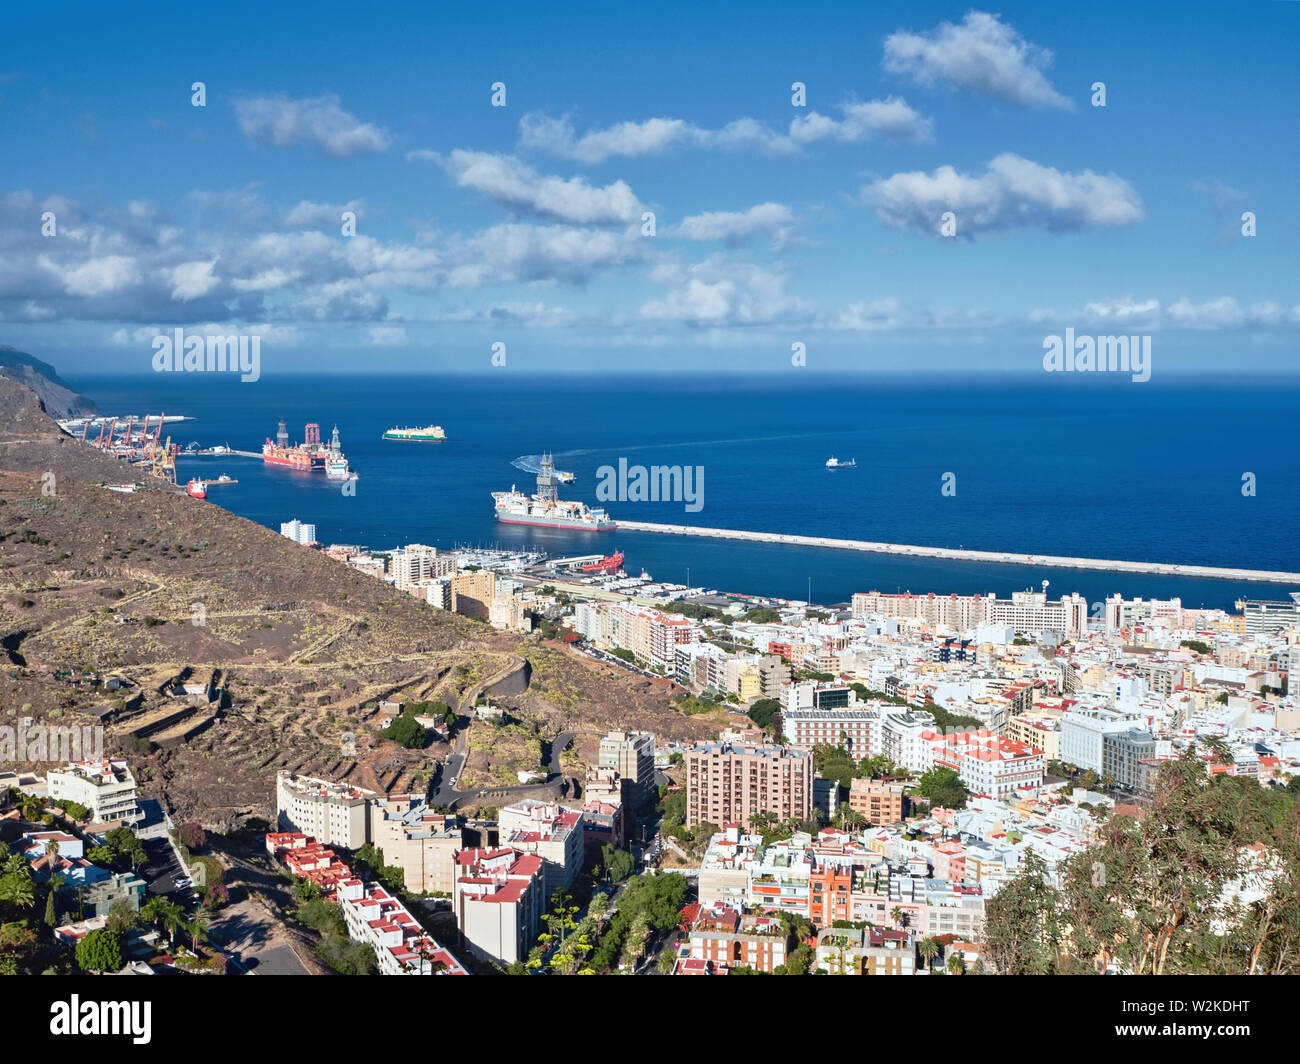 Port entrance of Santa Cruz de Tenerife photographed from high above. Dark blue Atlantic Ocean and sky with white clouds, a partial view of the white Stock Photo